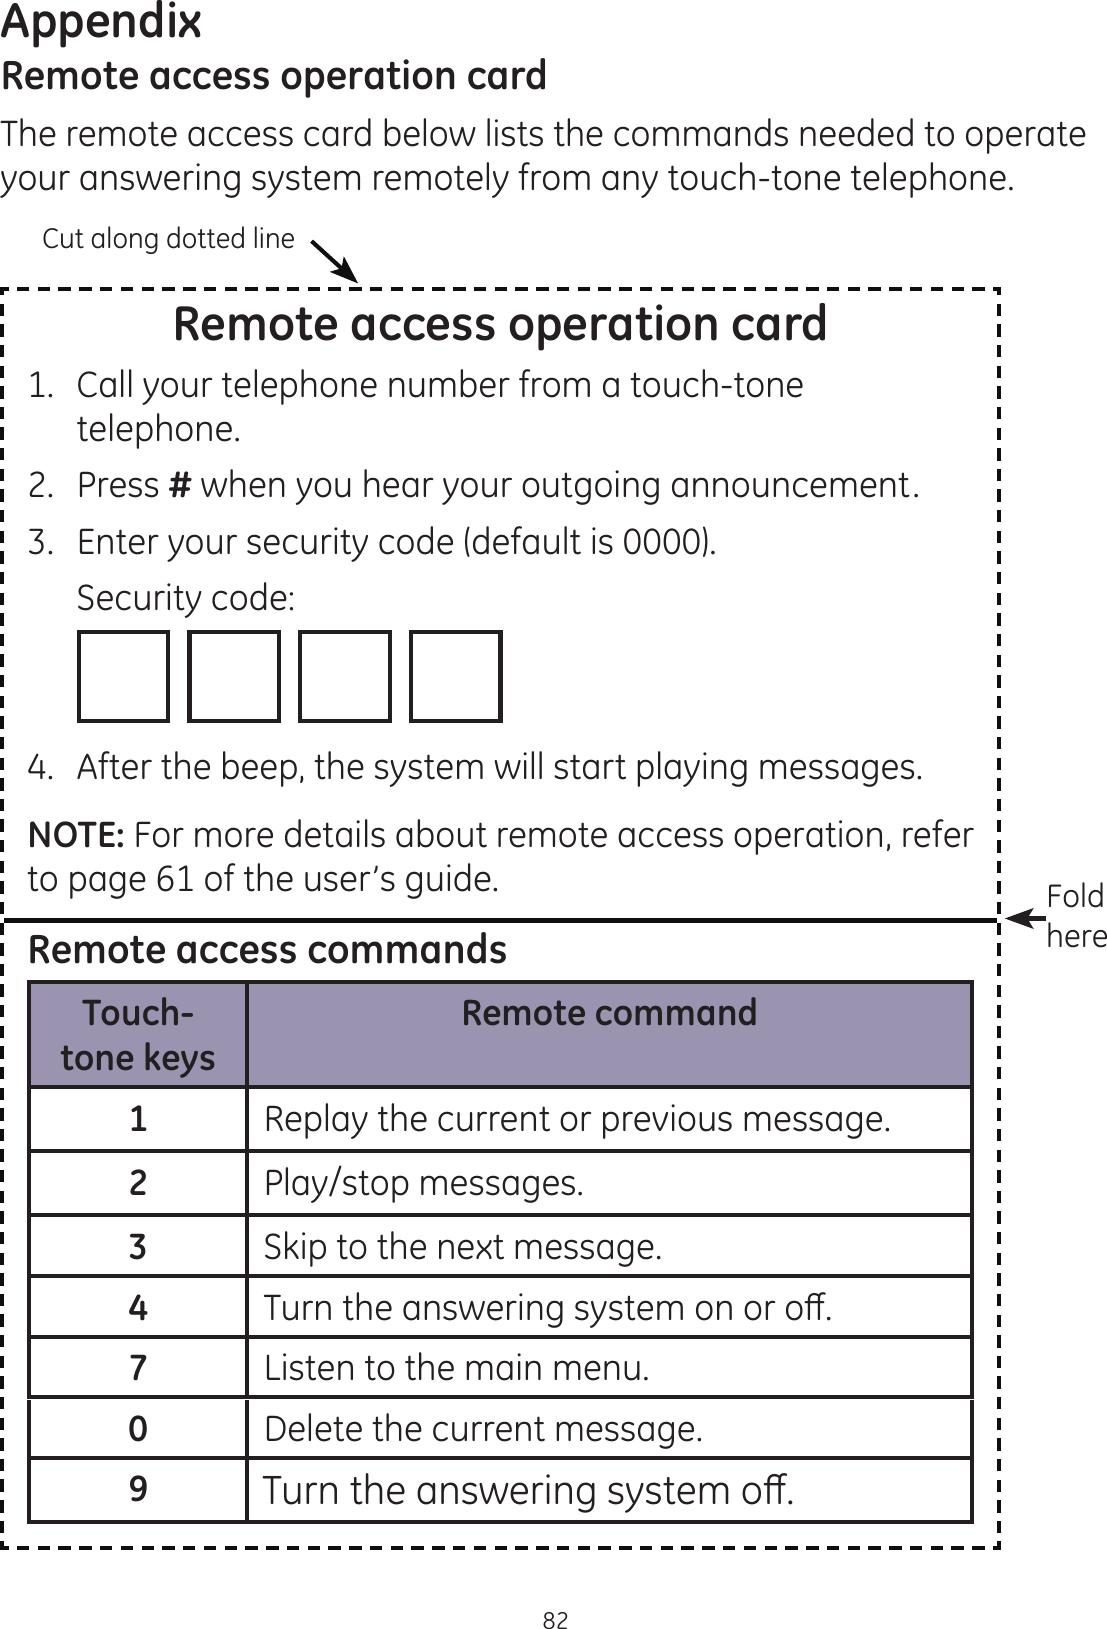 Appendix82Remote access operation cardThe remote access card below lists the commands needed to operate your answering system remotely from any touch-tone telephone. Remote access operation card1.   Call your telephone number from a touch-tone telephone.2.   Press # when you hear your outgoing announcement.3.   Enter your security code (default is 0000).  Security code:                   4.  After the beep, the system will start playing messages.NOTE: For more details about remote access operation, refer to page 61 of the user’s guide.Remote access commandsTouch-tone keysRemote command1Replay the current or previous message.2Play/stop messages.3Skip to the next message.47XUQWKHDQVZHULQJV\VWHPRQRURȺ7Listen to the main menu.0Delete the current message.97XUQWKHDQVZHULQJV\VWHPRȺCut along dotted lineFold here